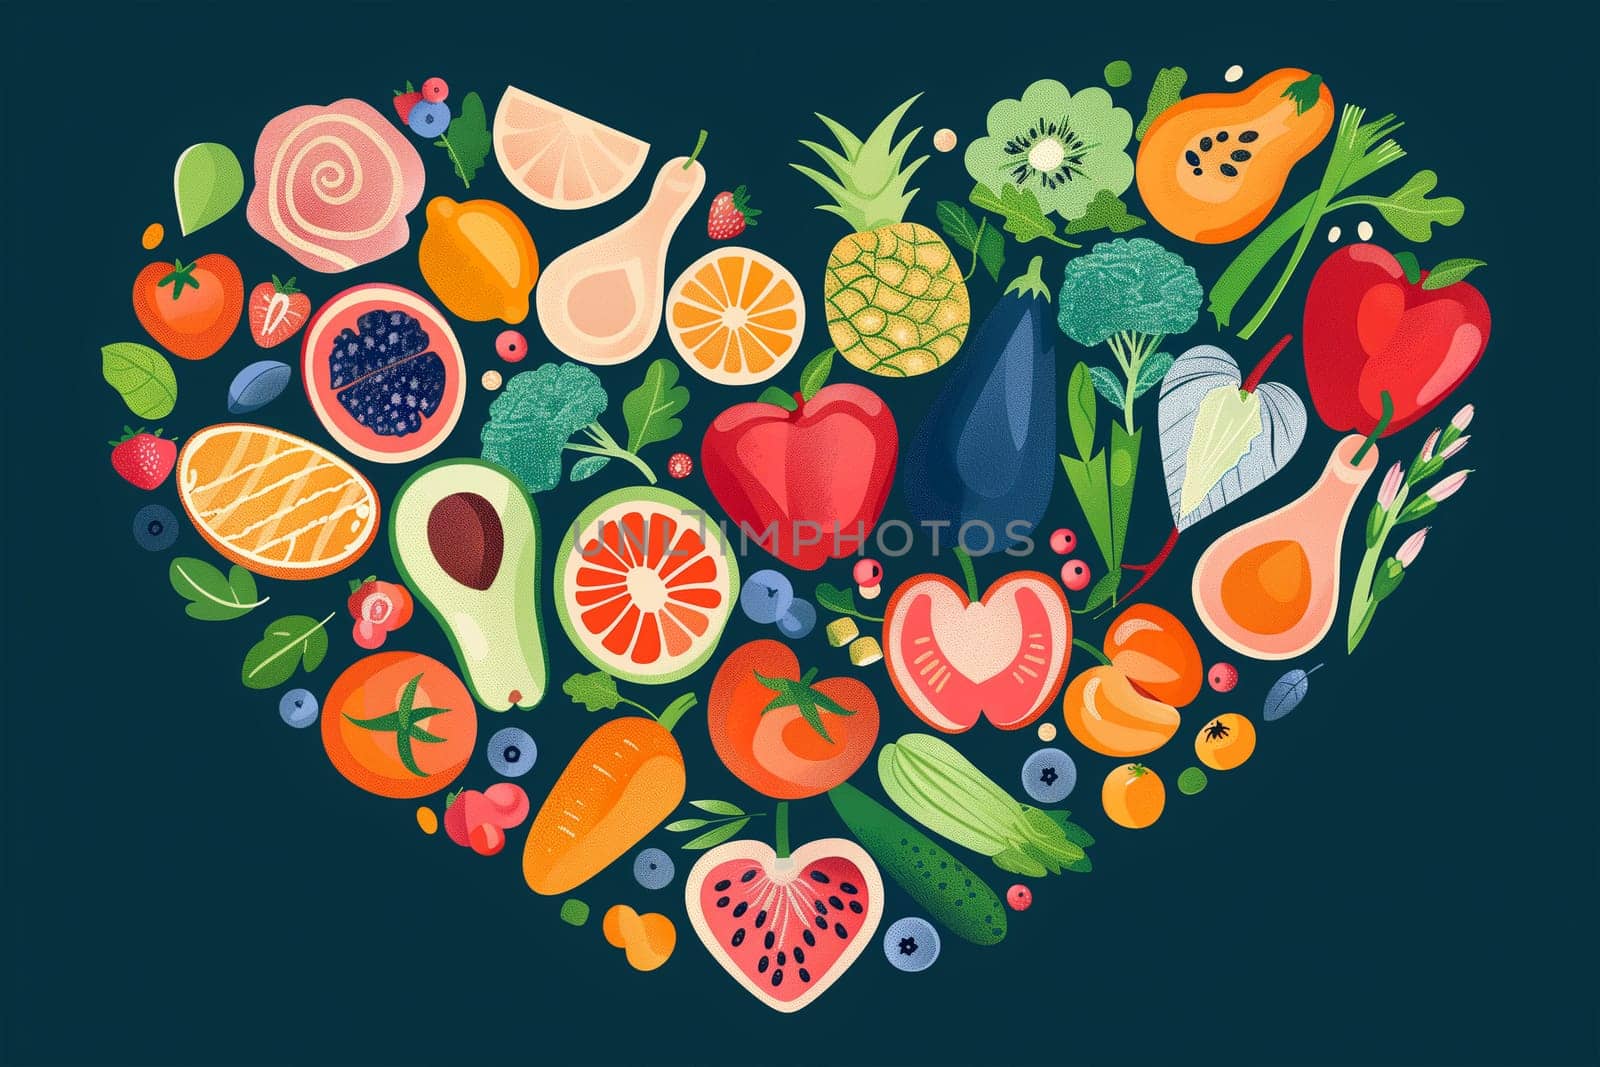 A heart-shaped arrangement of various fruits and vegetables, showcasing a colorful and healthy display.